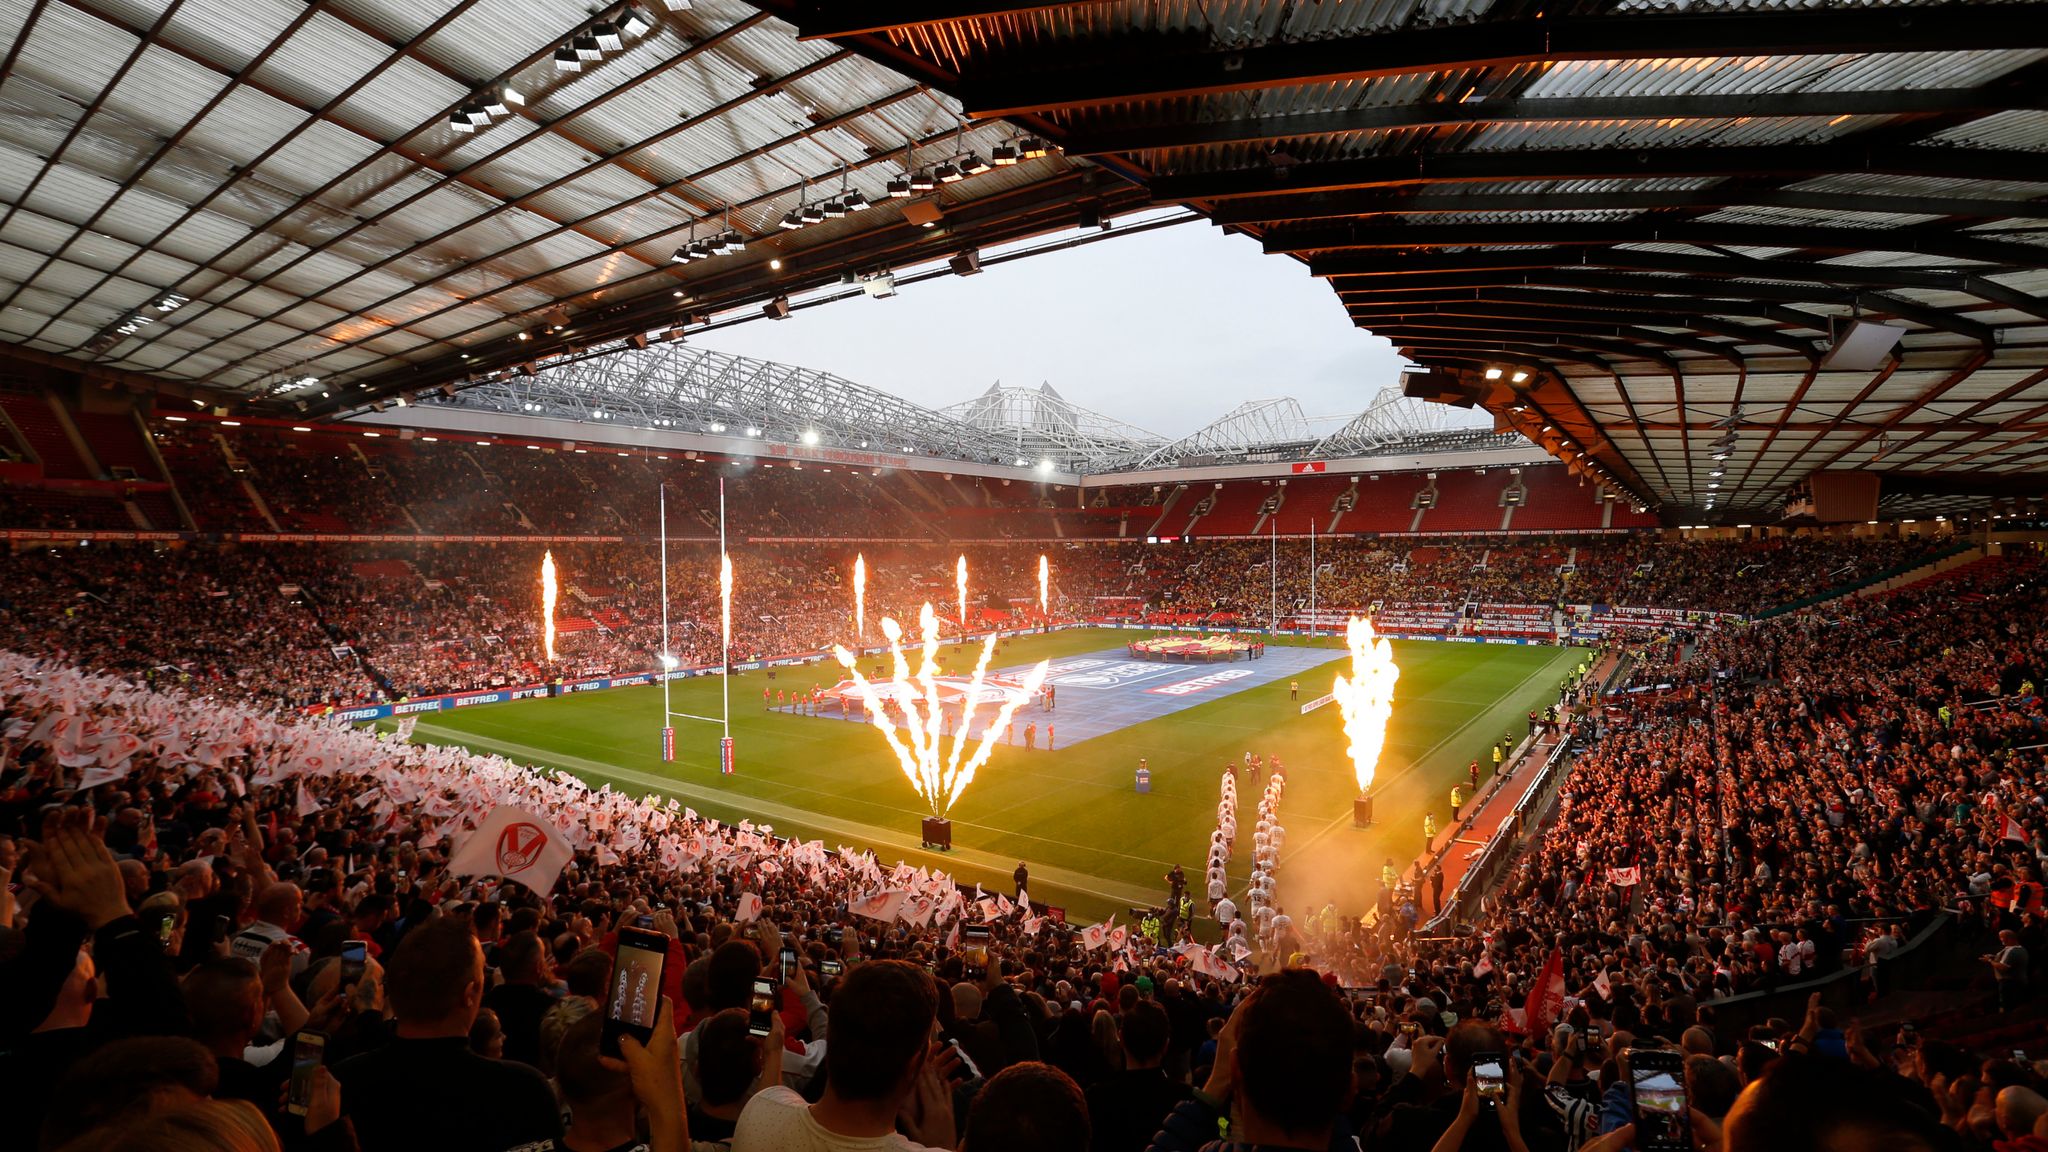 Players coming out for the start of the Super League Grand Final at Old Trafford.